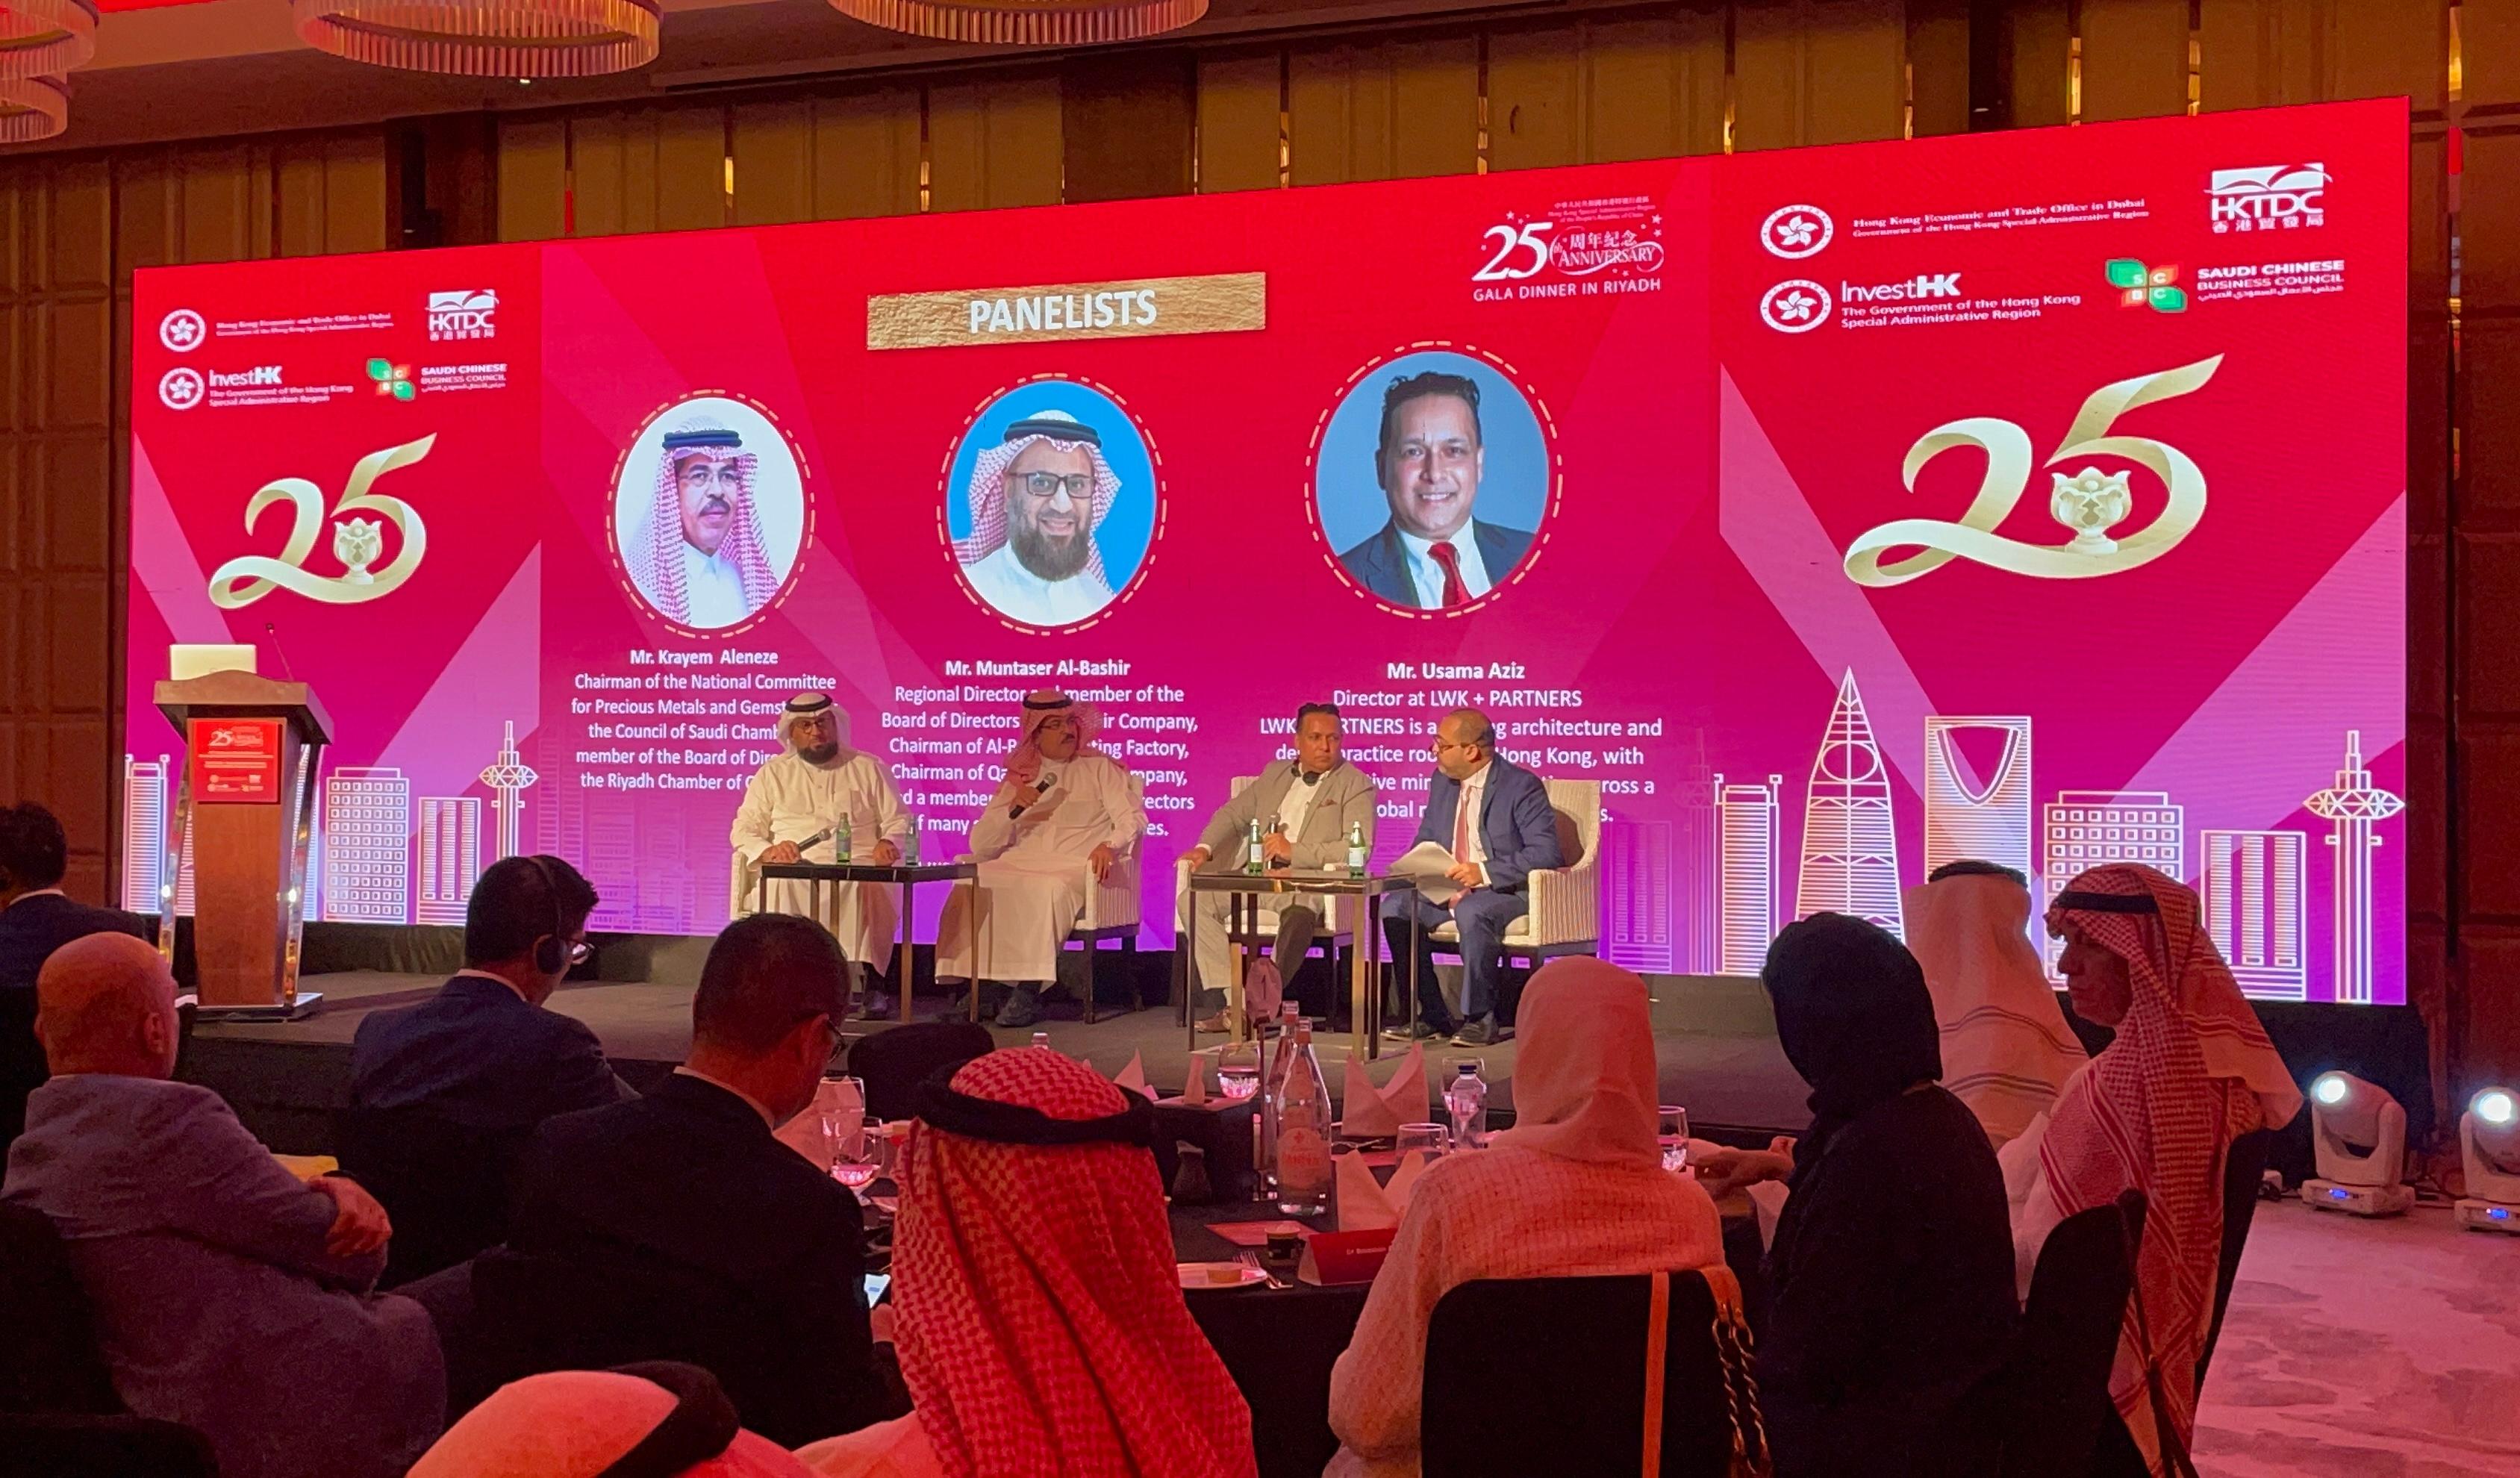 The Hong Kong Economic and Trade Office in Dubai held a business seminar in Riyadh, Saudi Arabia, on November 10 (Riyadh time) to celebrate the 25th anniversary of the establishment of the Hong Kong Special Administrative Region. A panel of leading business people in Riyadh is pictured speaking with the attendees on their experiences and insights on establishing and expanding their businesses in Hong Kong.